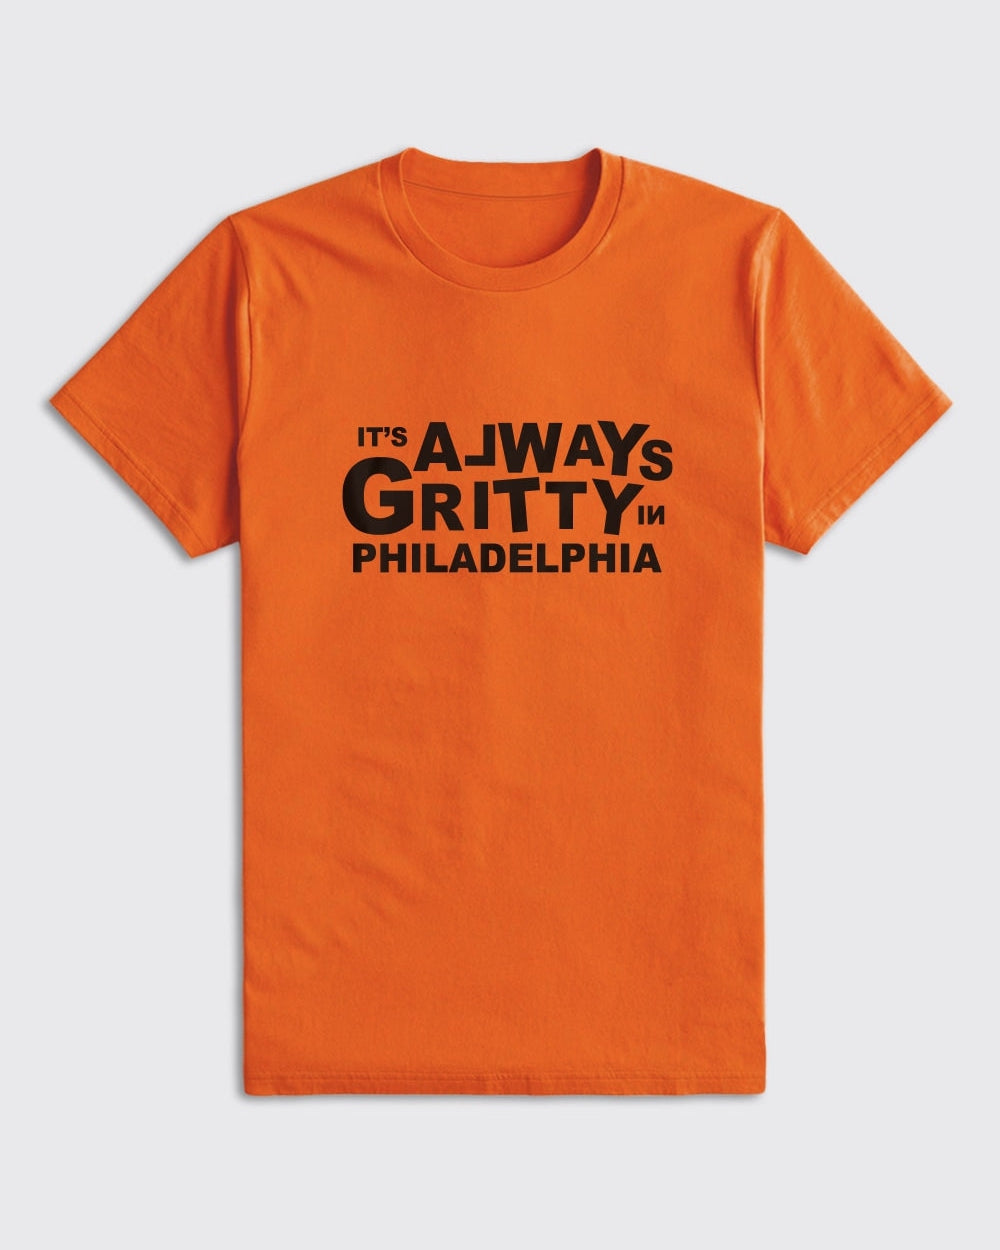 It's Always Gritty In Philadelphia Shirt - Flyers, T-Shirts - Philly Sports Shirts